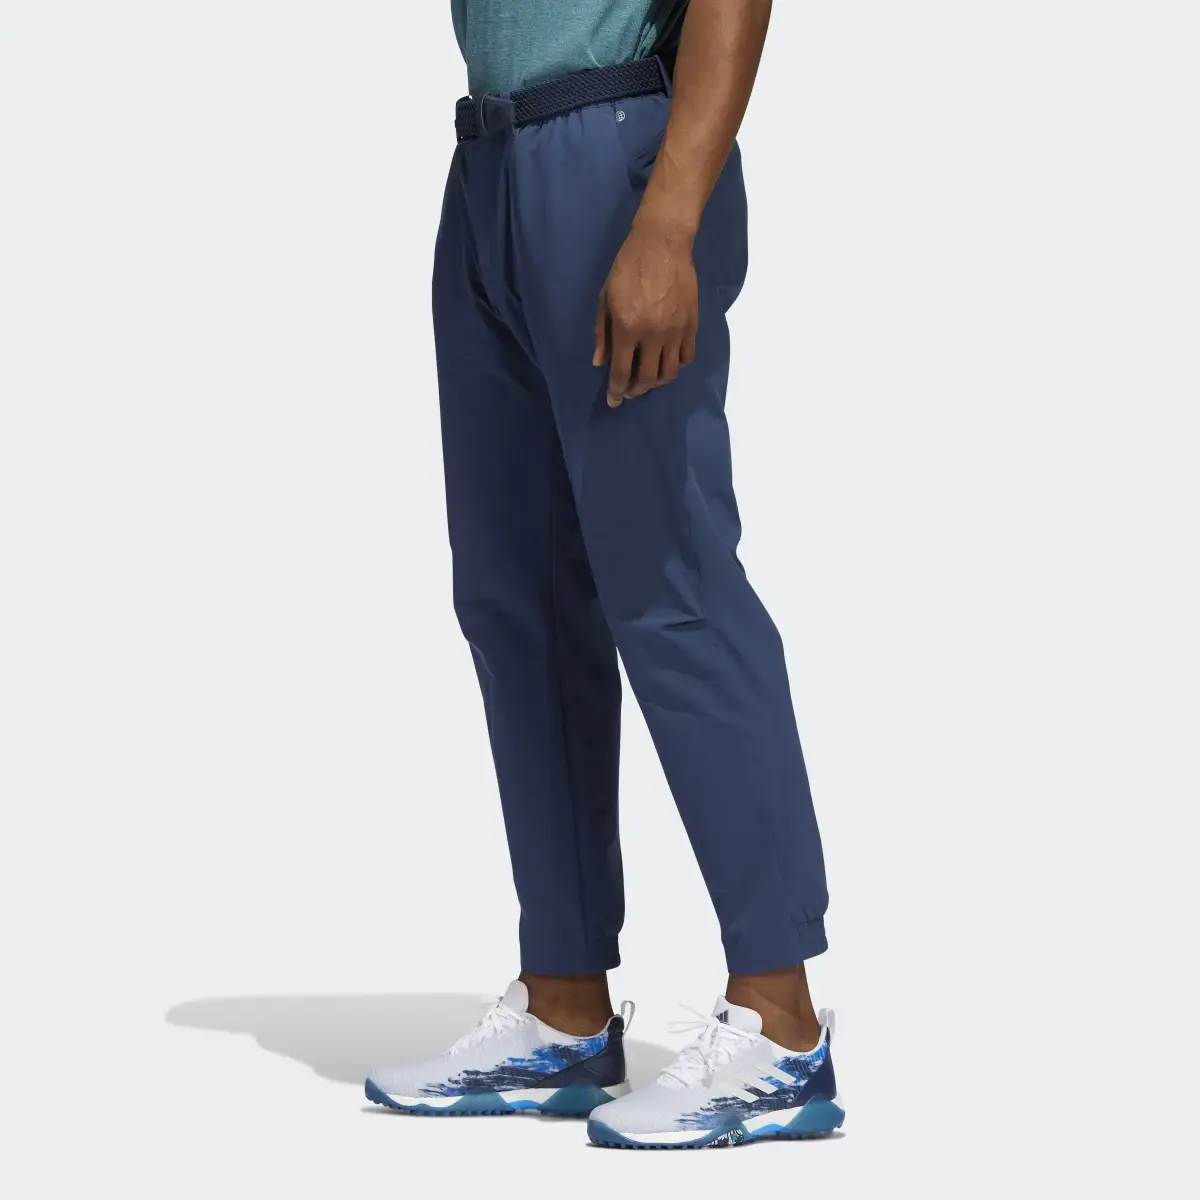 Adidas Go-To Commuter Golf Pants. 2